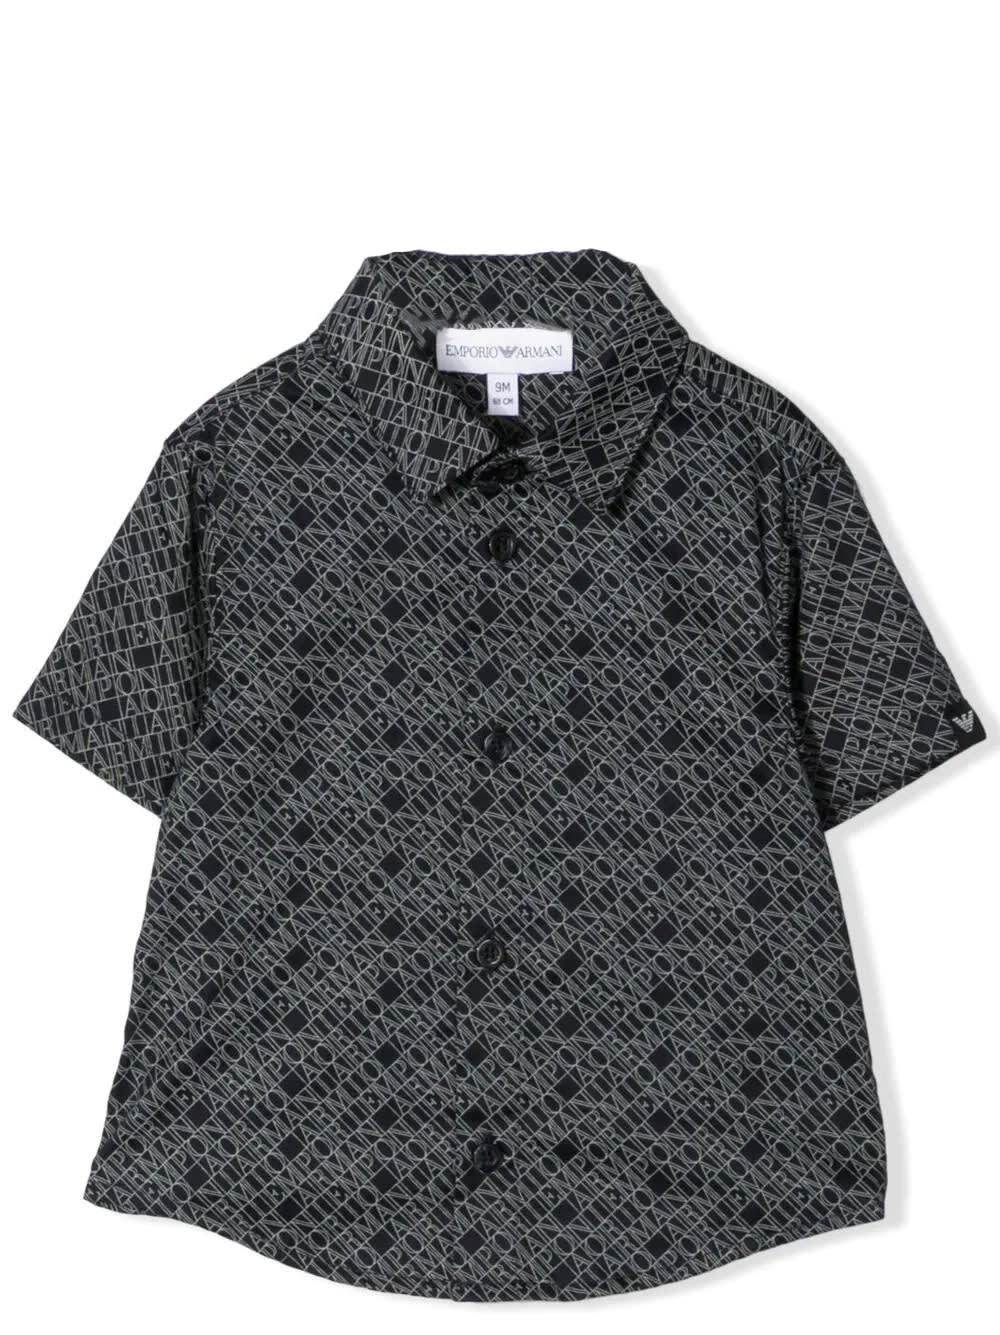 Emporio Armani Babies' Shirt With Print In Navy